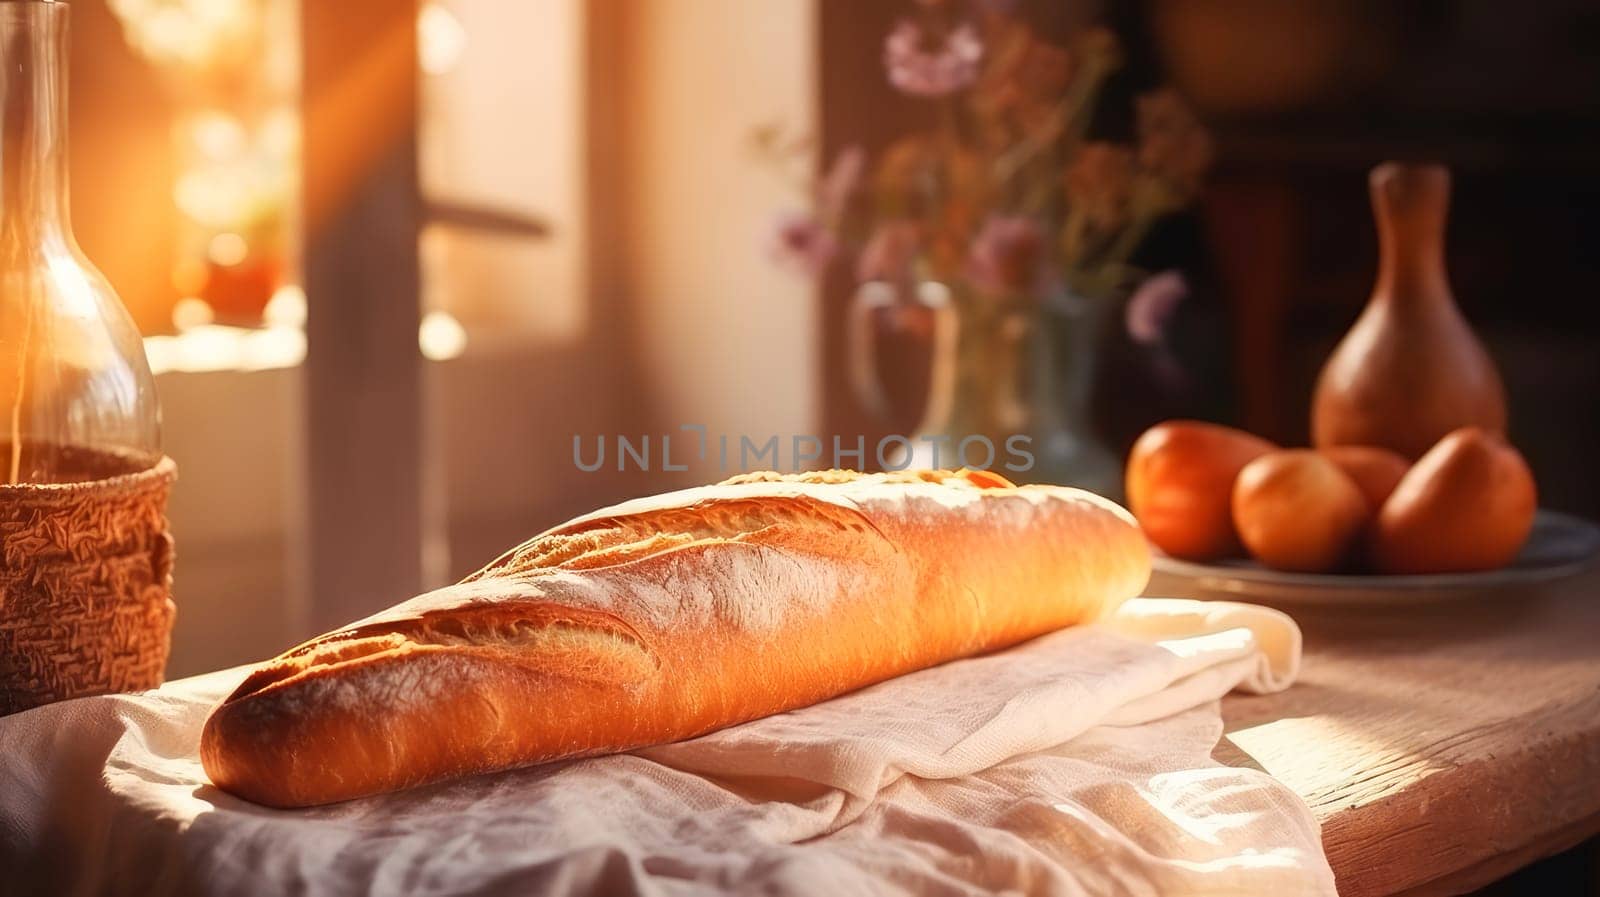 Fresh fragrant, still life with French baguettes from fresh bread poolish on a wooden cutting board and wheat.n. Fresh classic pastries. Delicious food private bakery, small business, self-employed, small business city, cozy place for communication